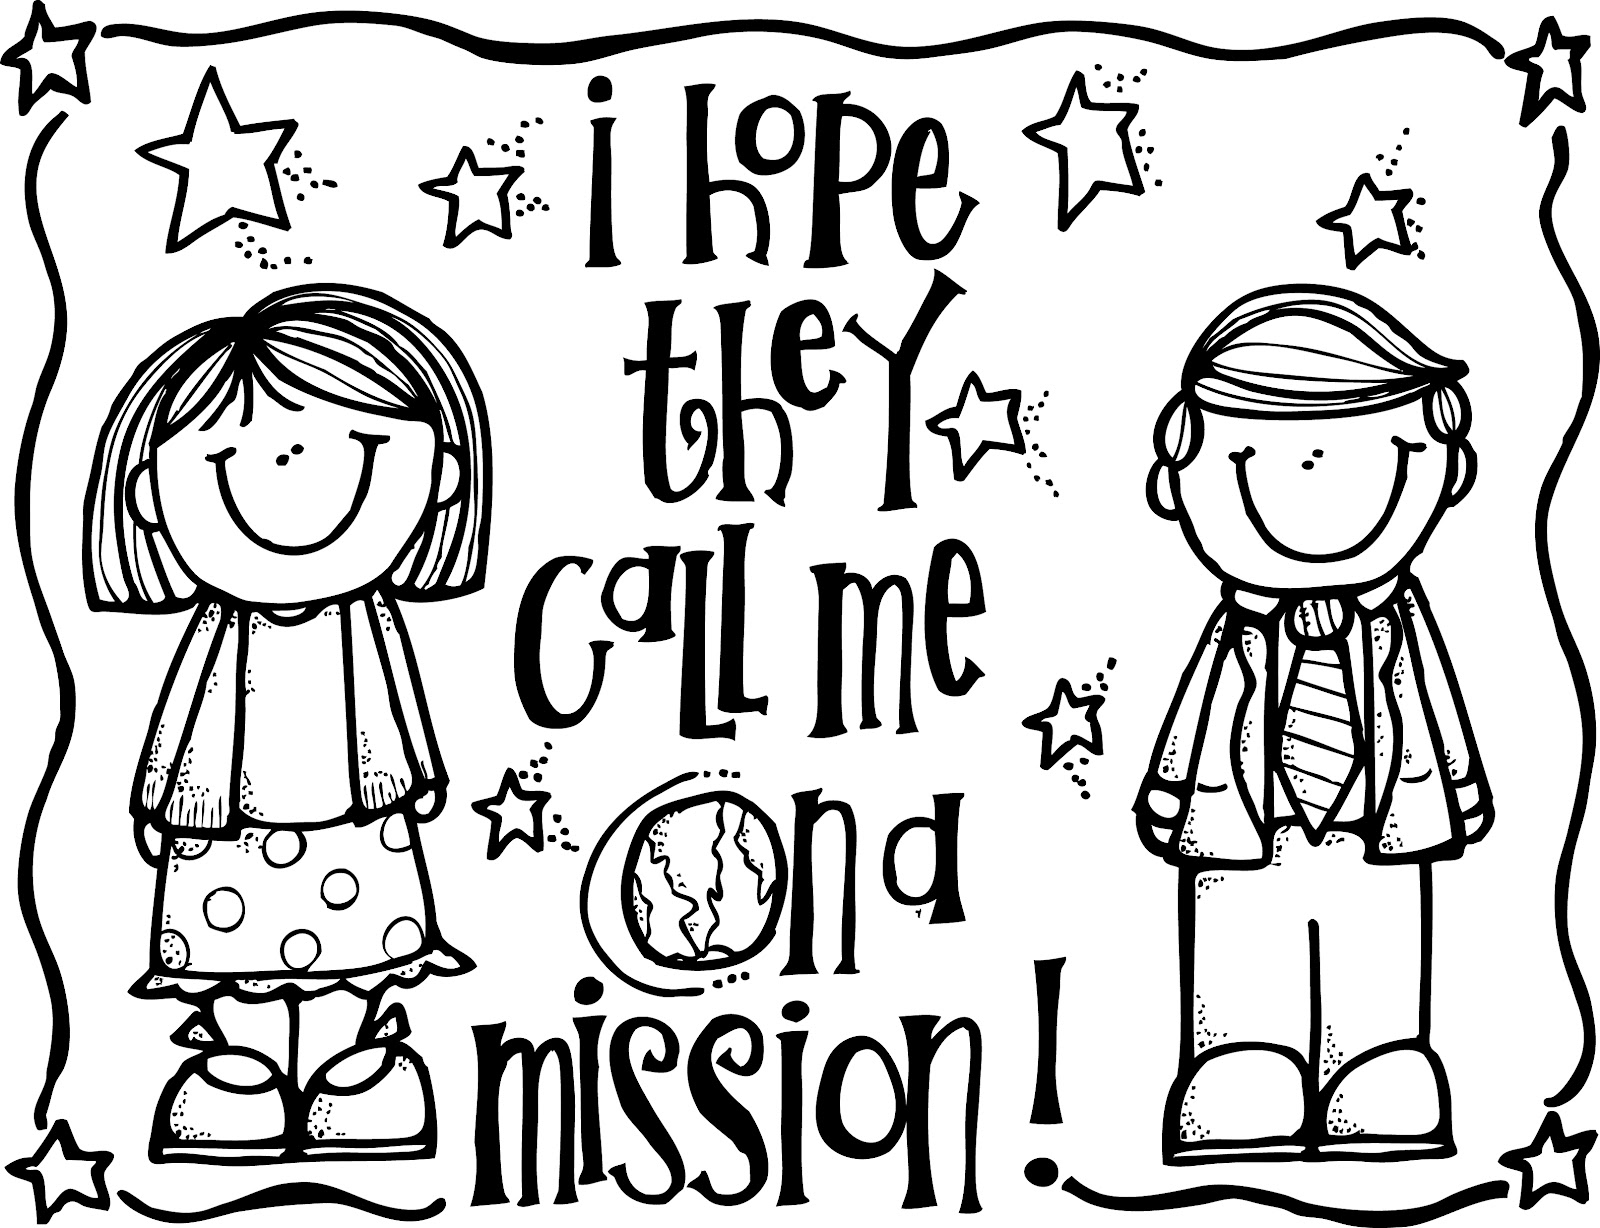 I hope they call me on a mission coloring page